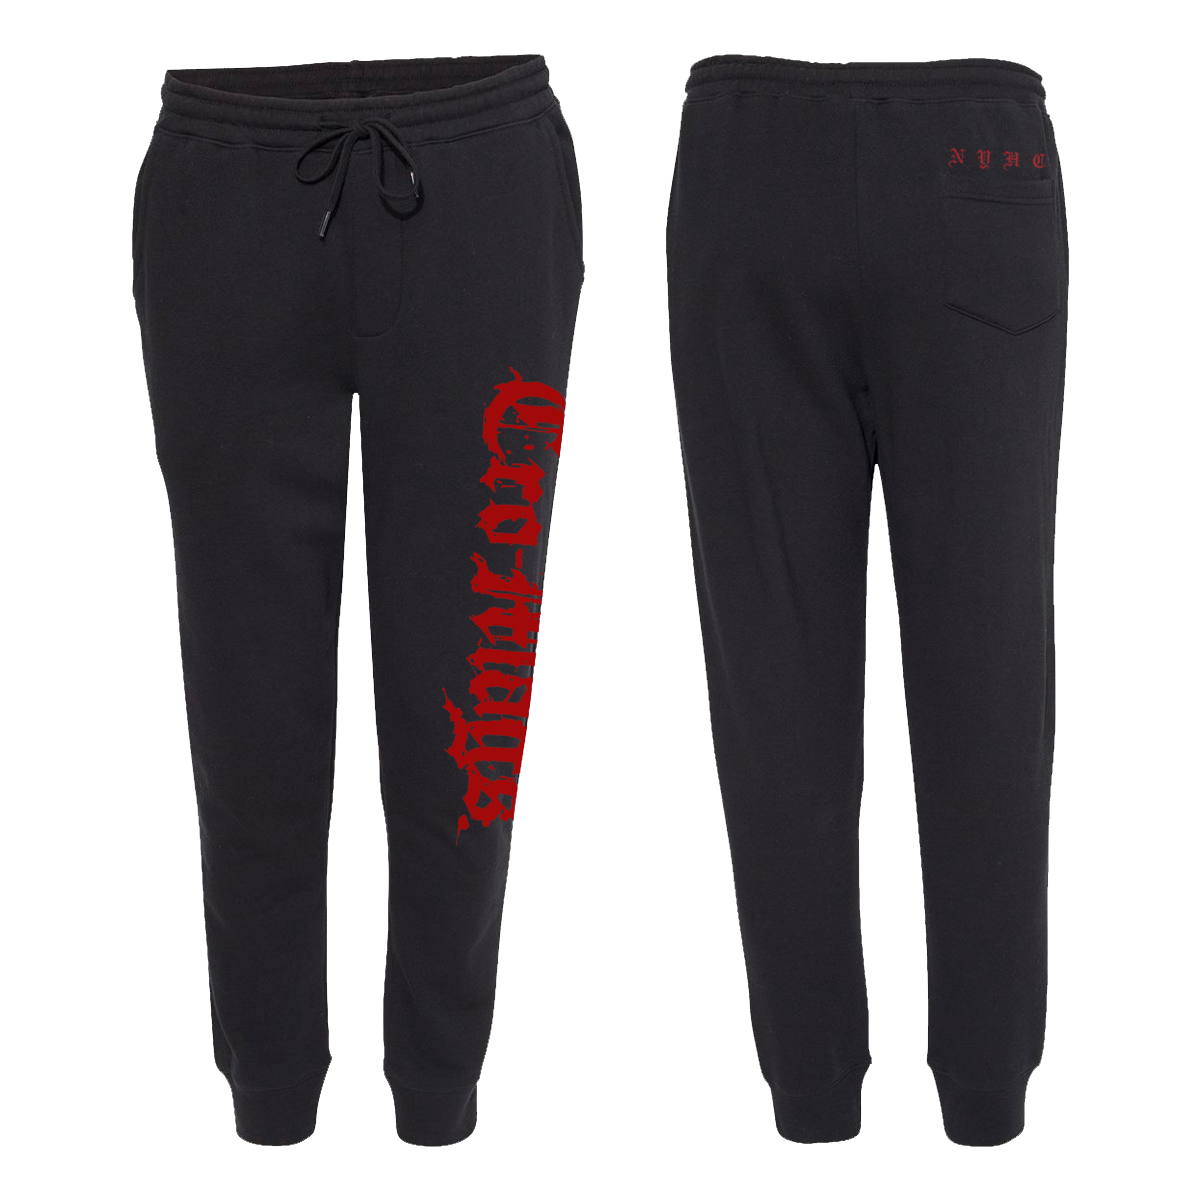 Cro-Mags - NYHC Joggers (Black)